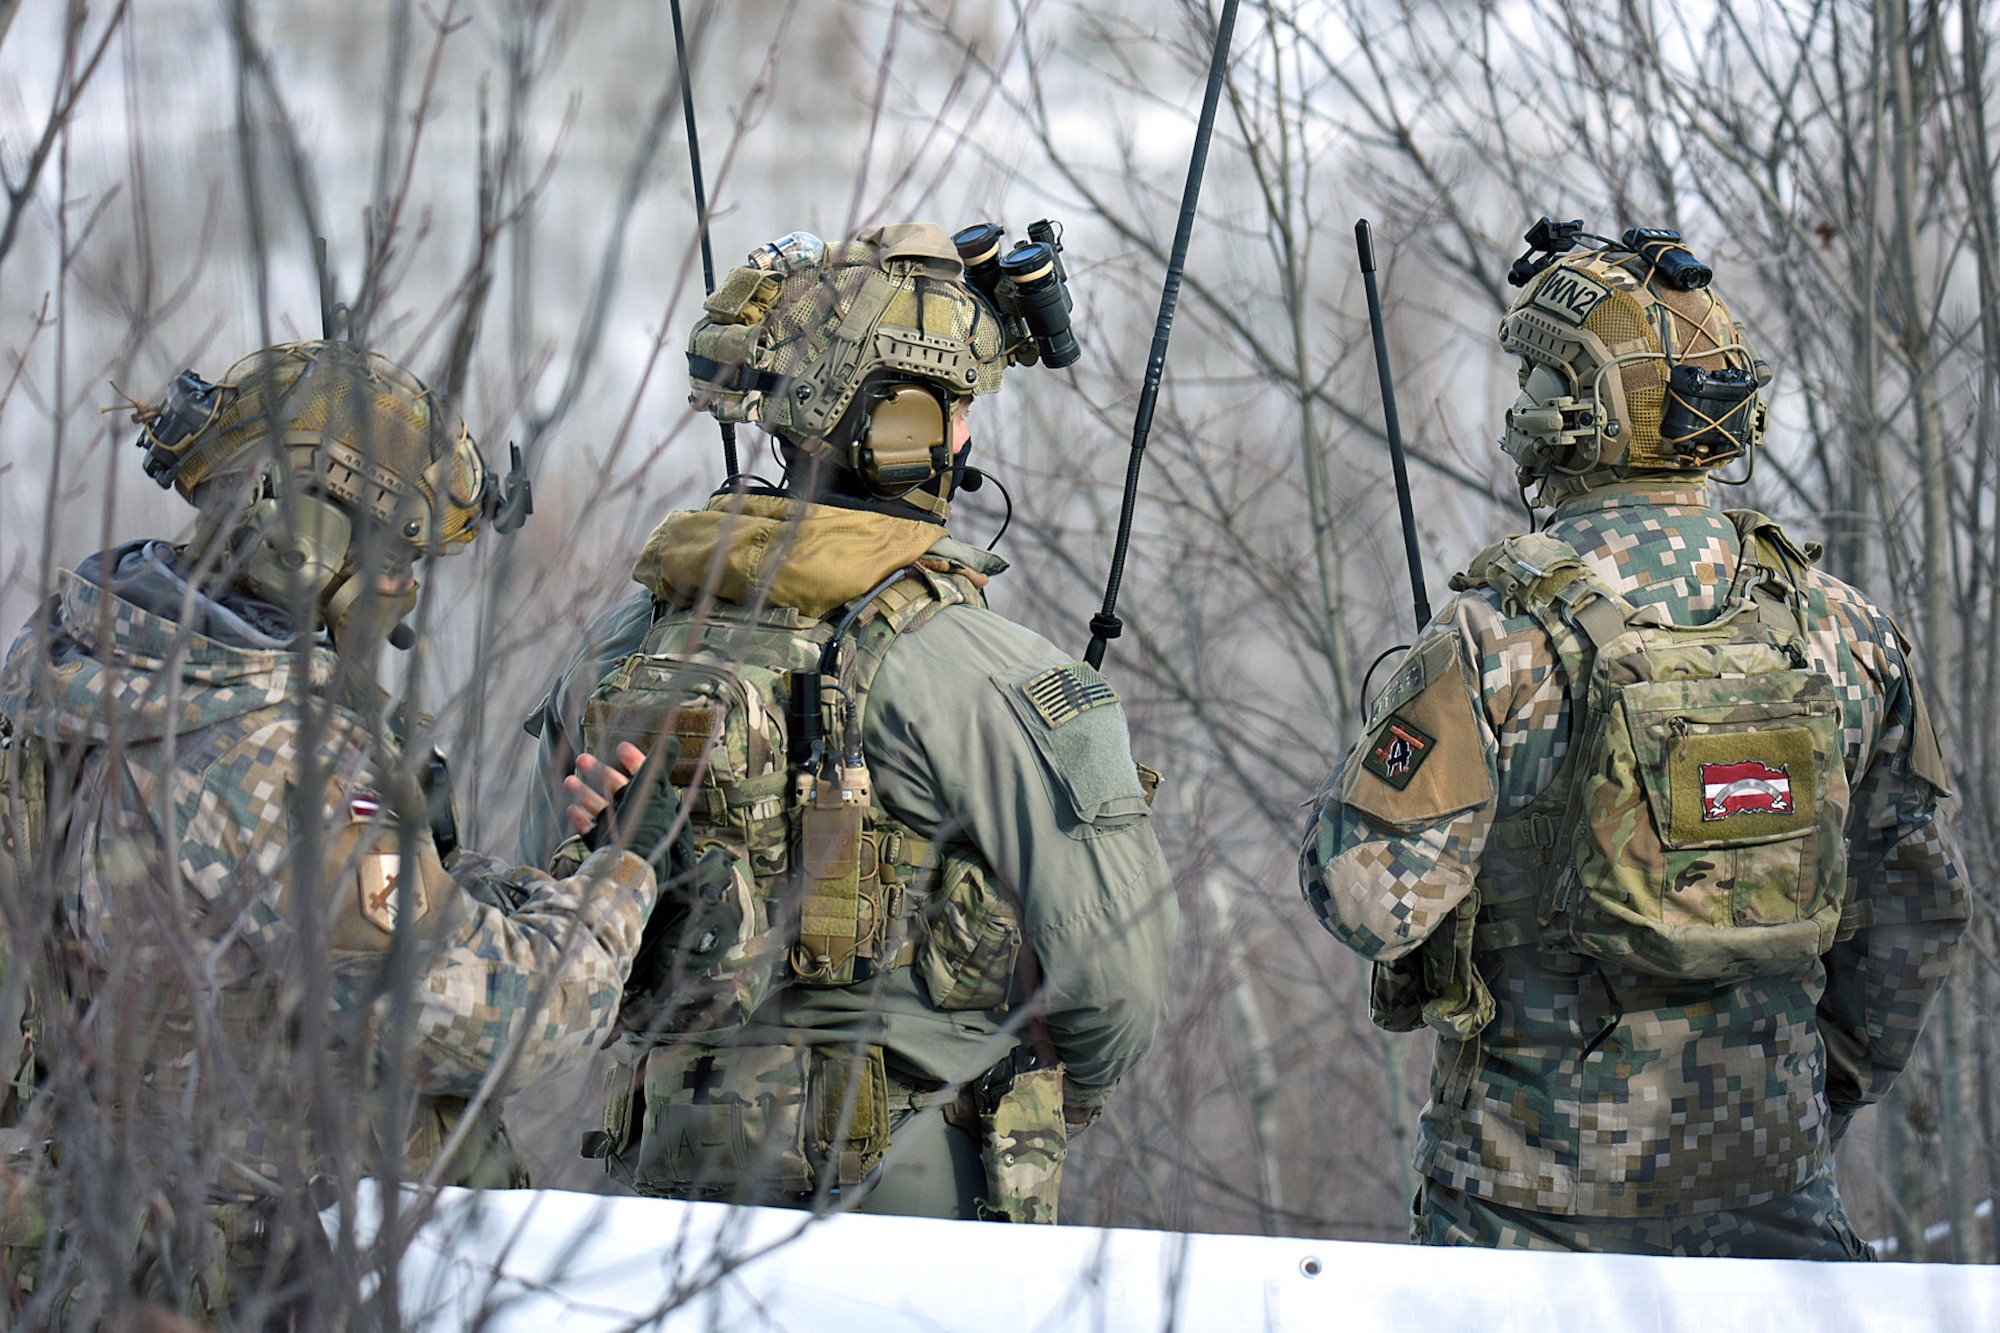 Military personnel from the Latvian National Armed Forces work side-by-side with U.S. Army Soldiers assigned to Battery C, 1st Battalion, 120th Field Artillery Regiment, Wisconsin Army National Guard, while conducting close air support training during Northern Strike 22-1 (“Winter Strike”) at the National All-Domain Warfighting Center, Grayling, Mich., Jan. 27, 2022.